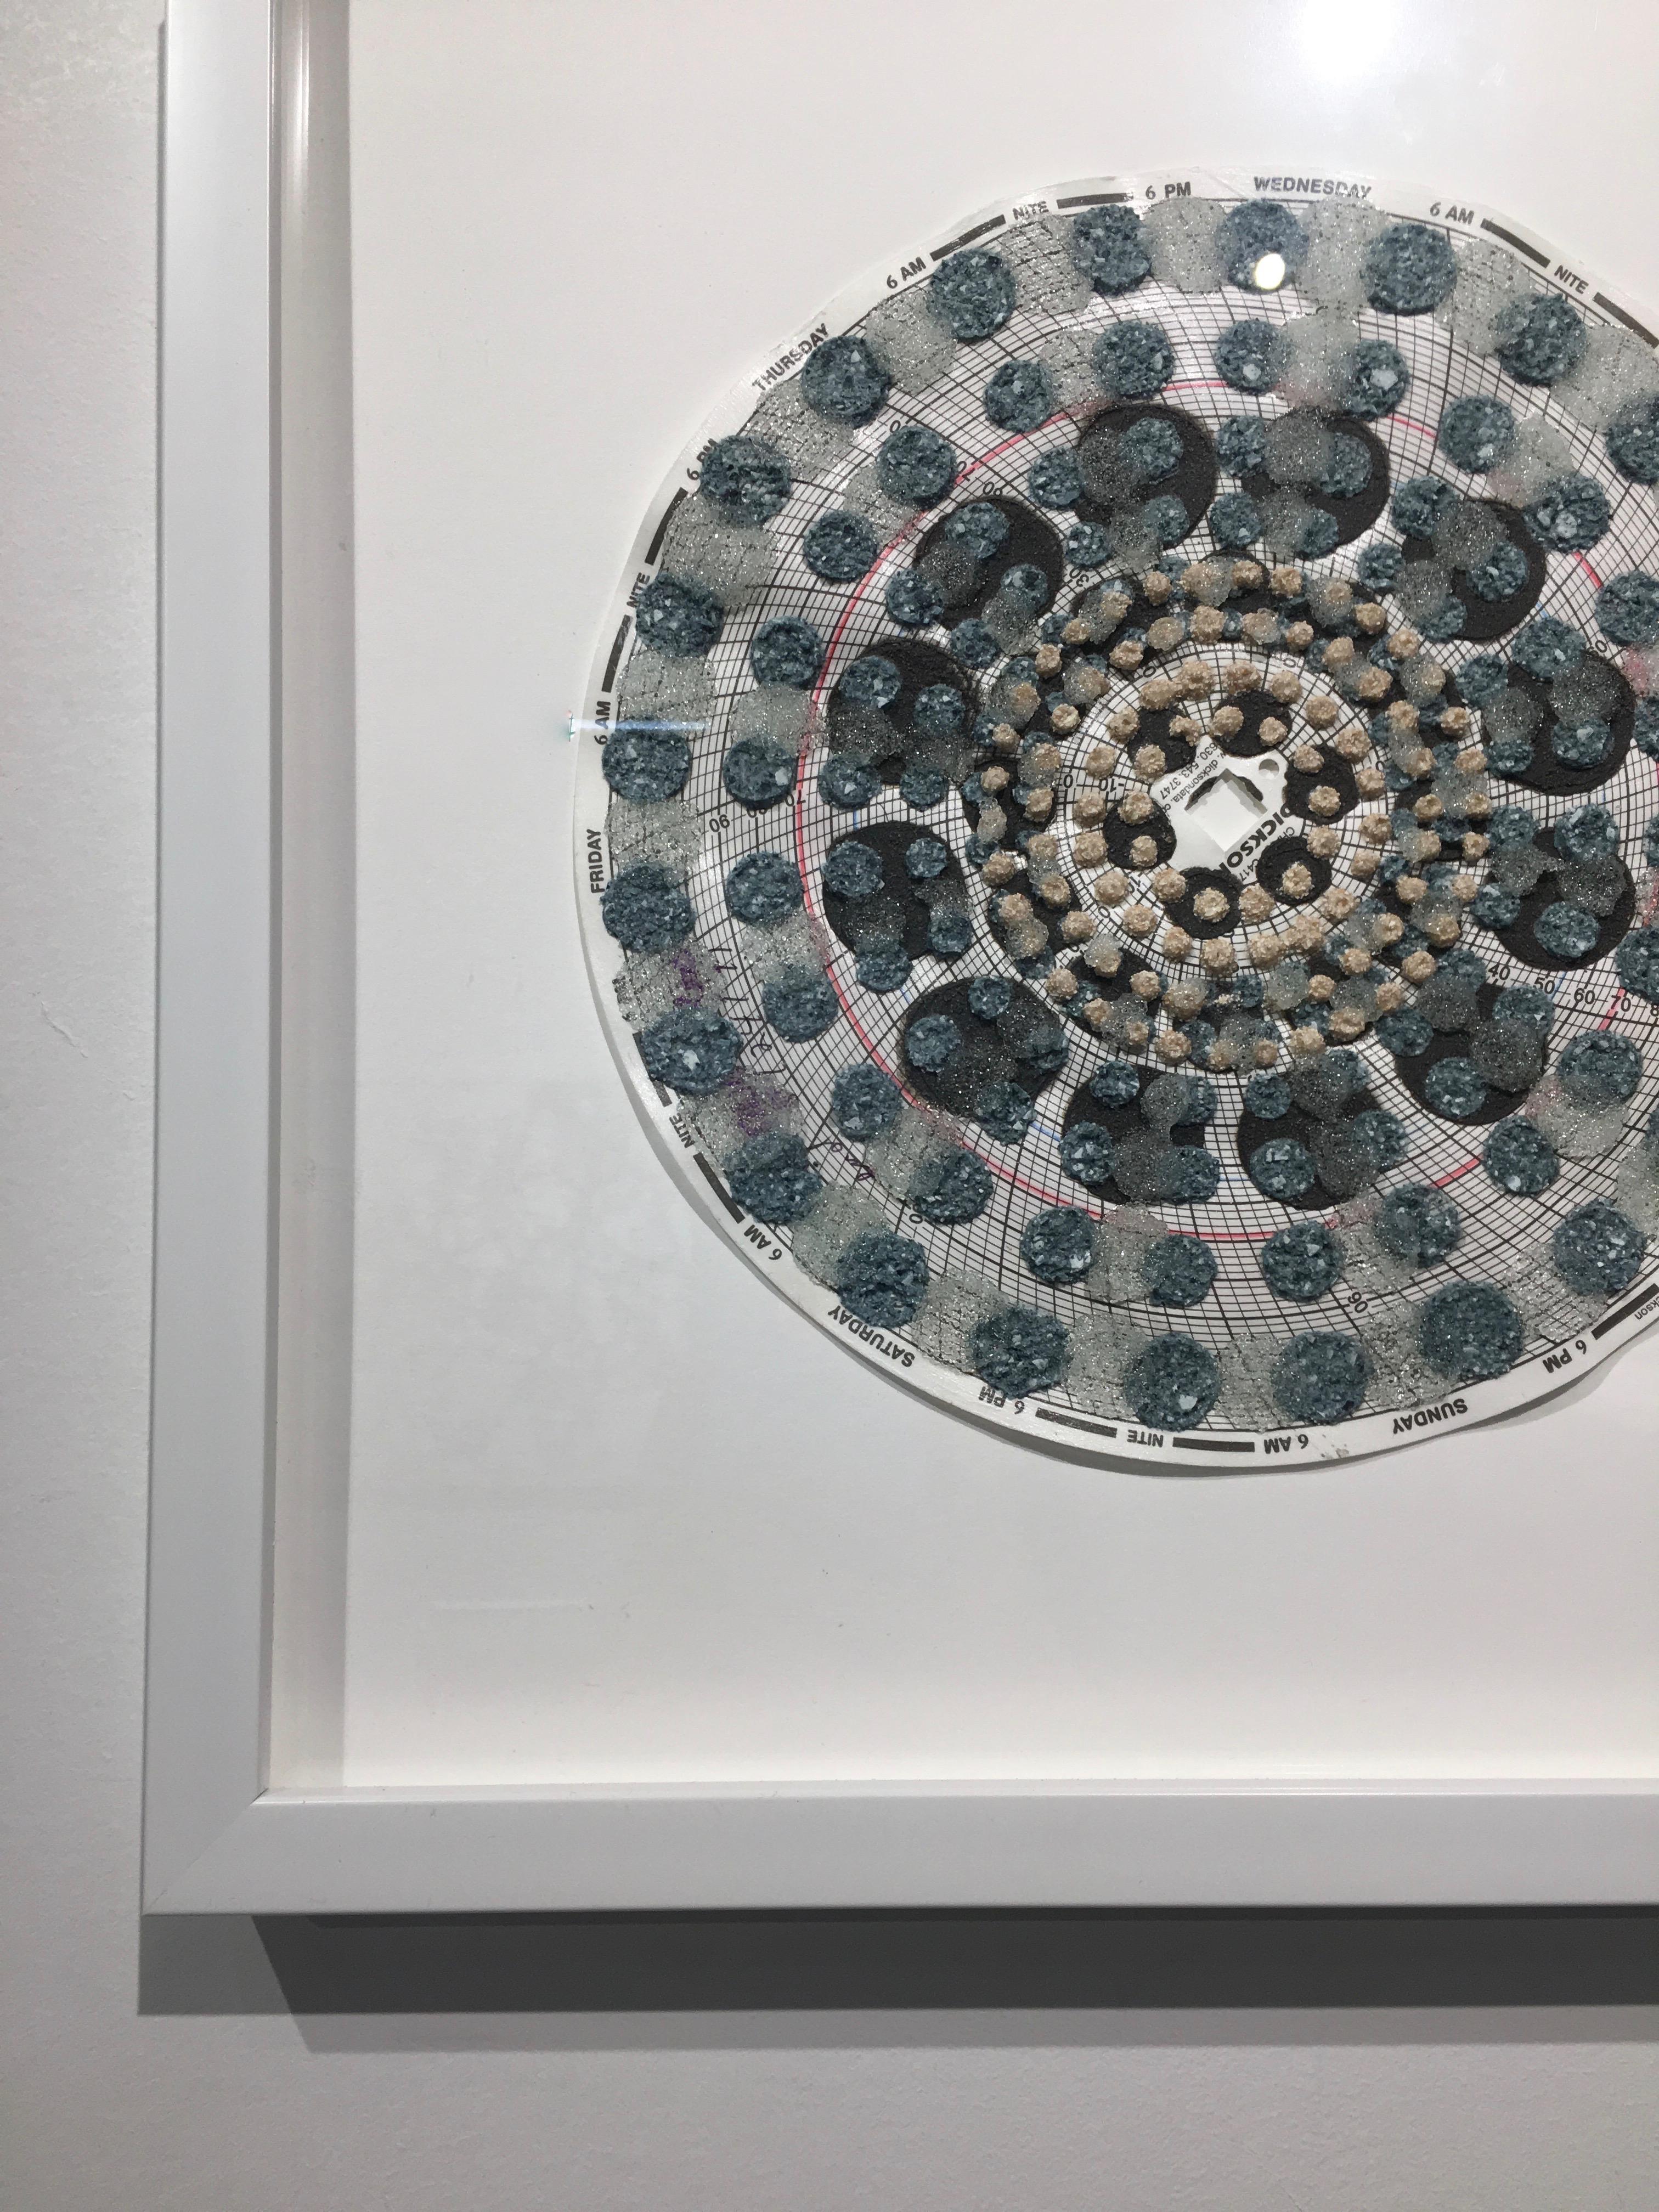 Carefully applied layers of wood ash, chicken eggshell, emu eggshell, glass beads, and polymer medium on hygrothermogaph paper create surface texture in this mandala made up of intricate patterns in an ordered, symmetrical, circular composition in